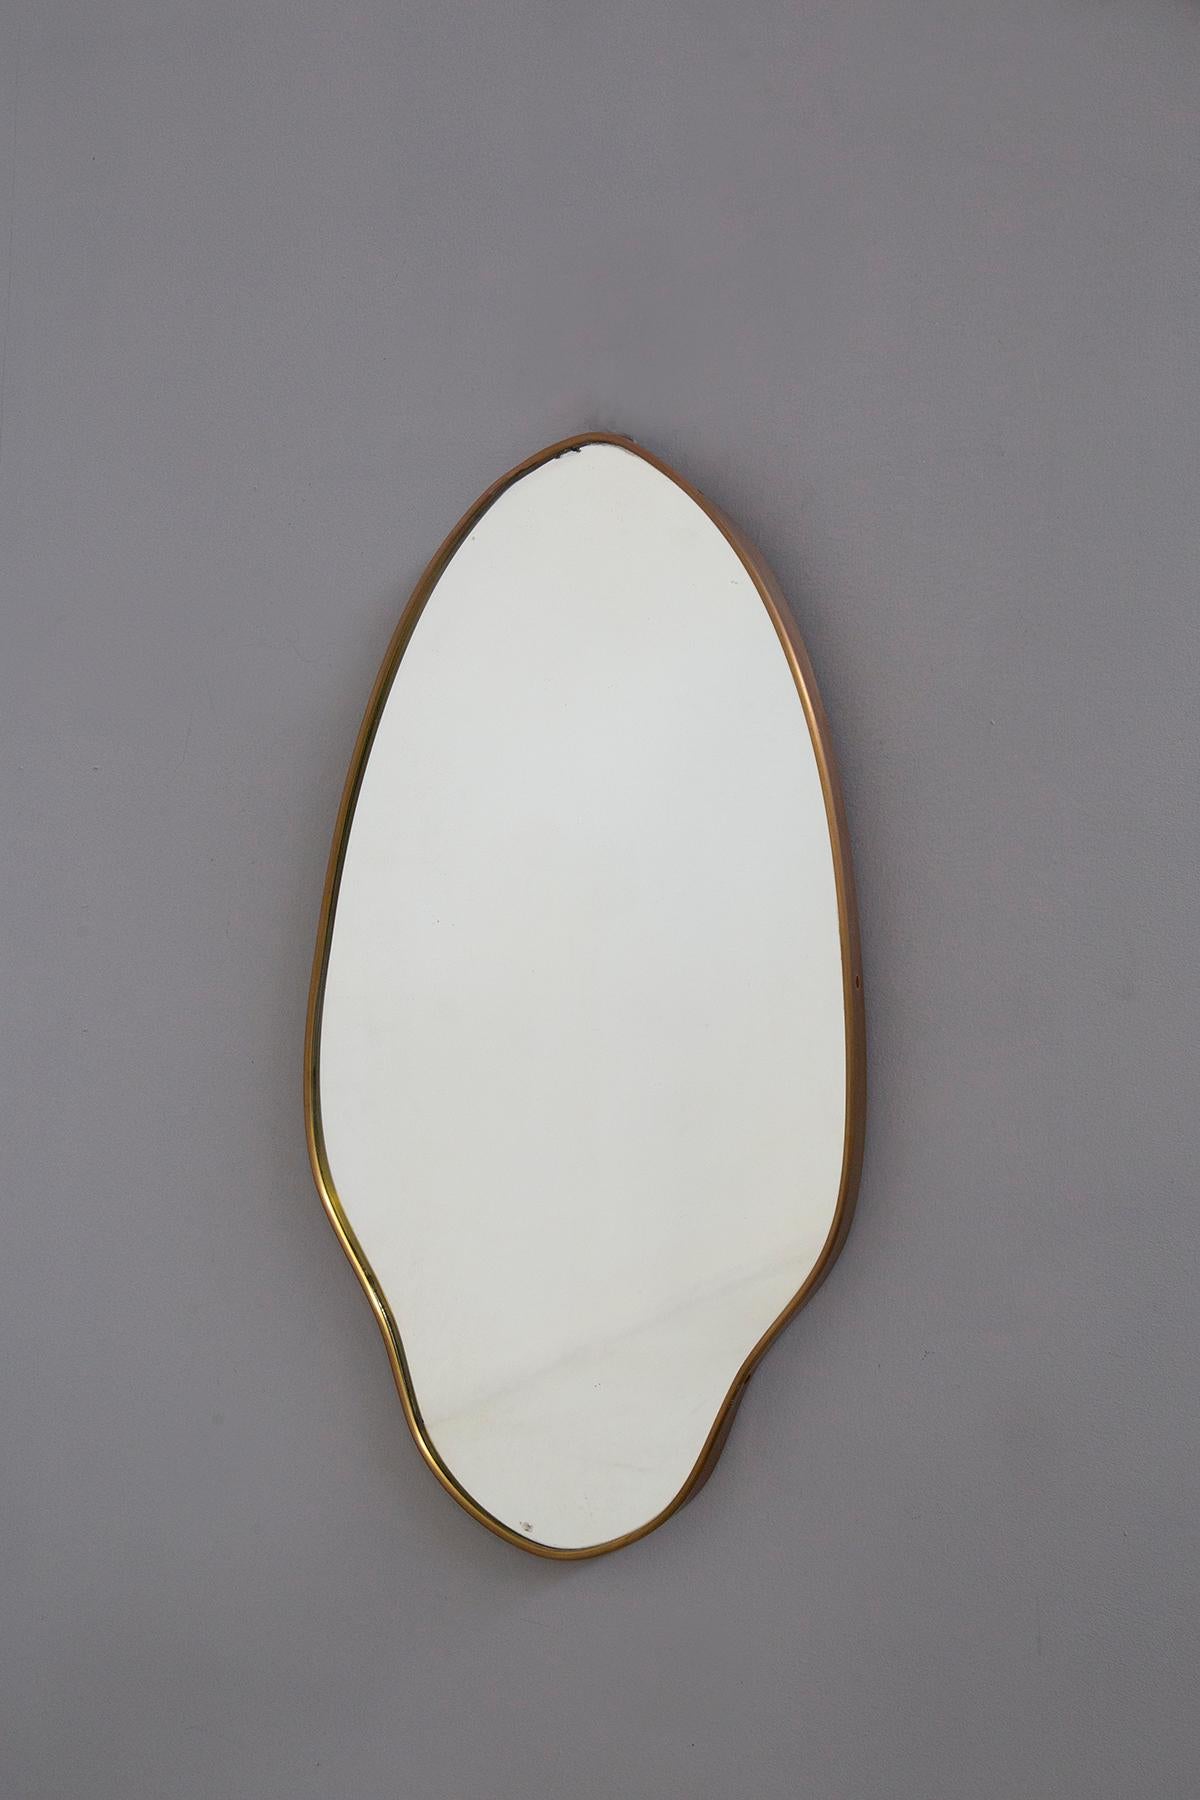 Transport yourself back to the glamorous 1950s with this vintage Italian brass mirror, a stunning piece that embodies the essence of timeless elegance. This mirror is not just a reflection; it is a statement of style and sophistication.

The first